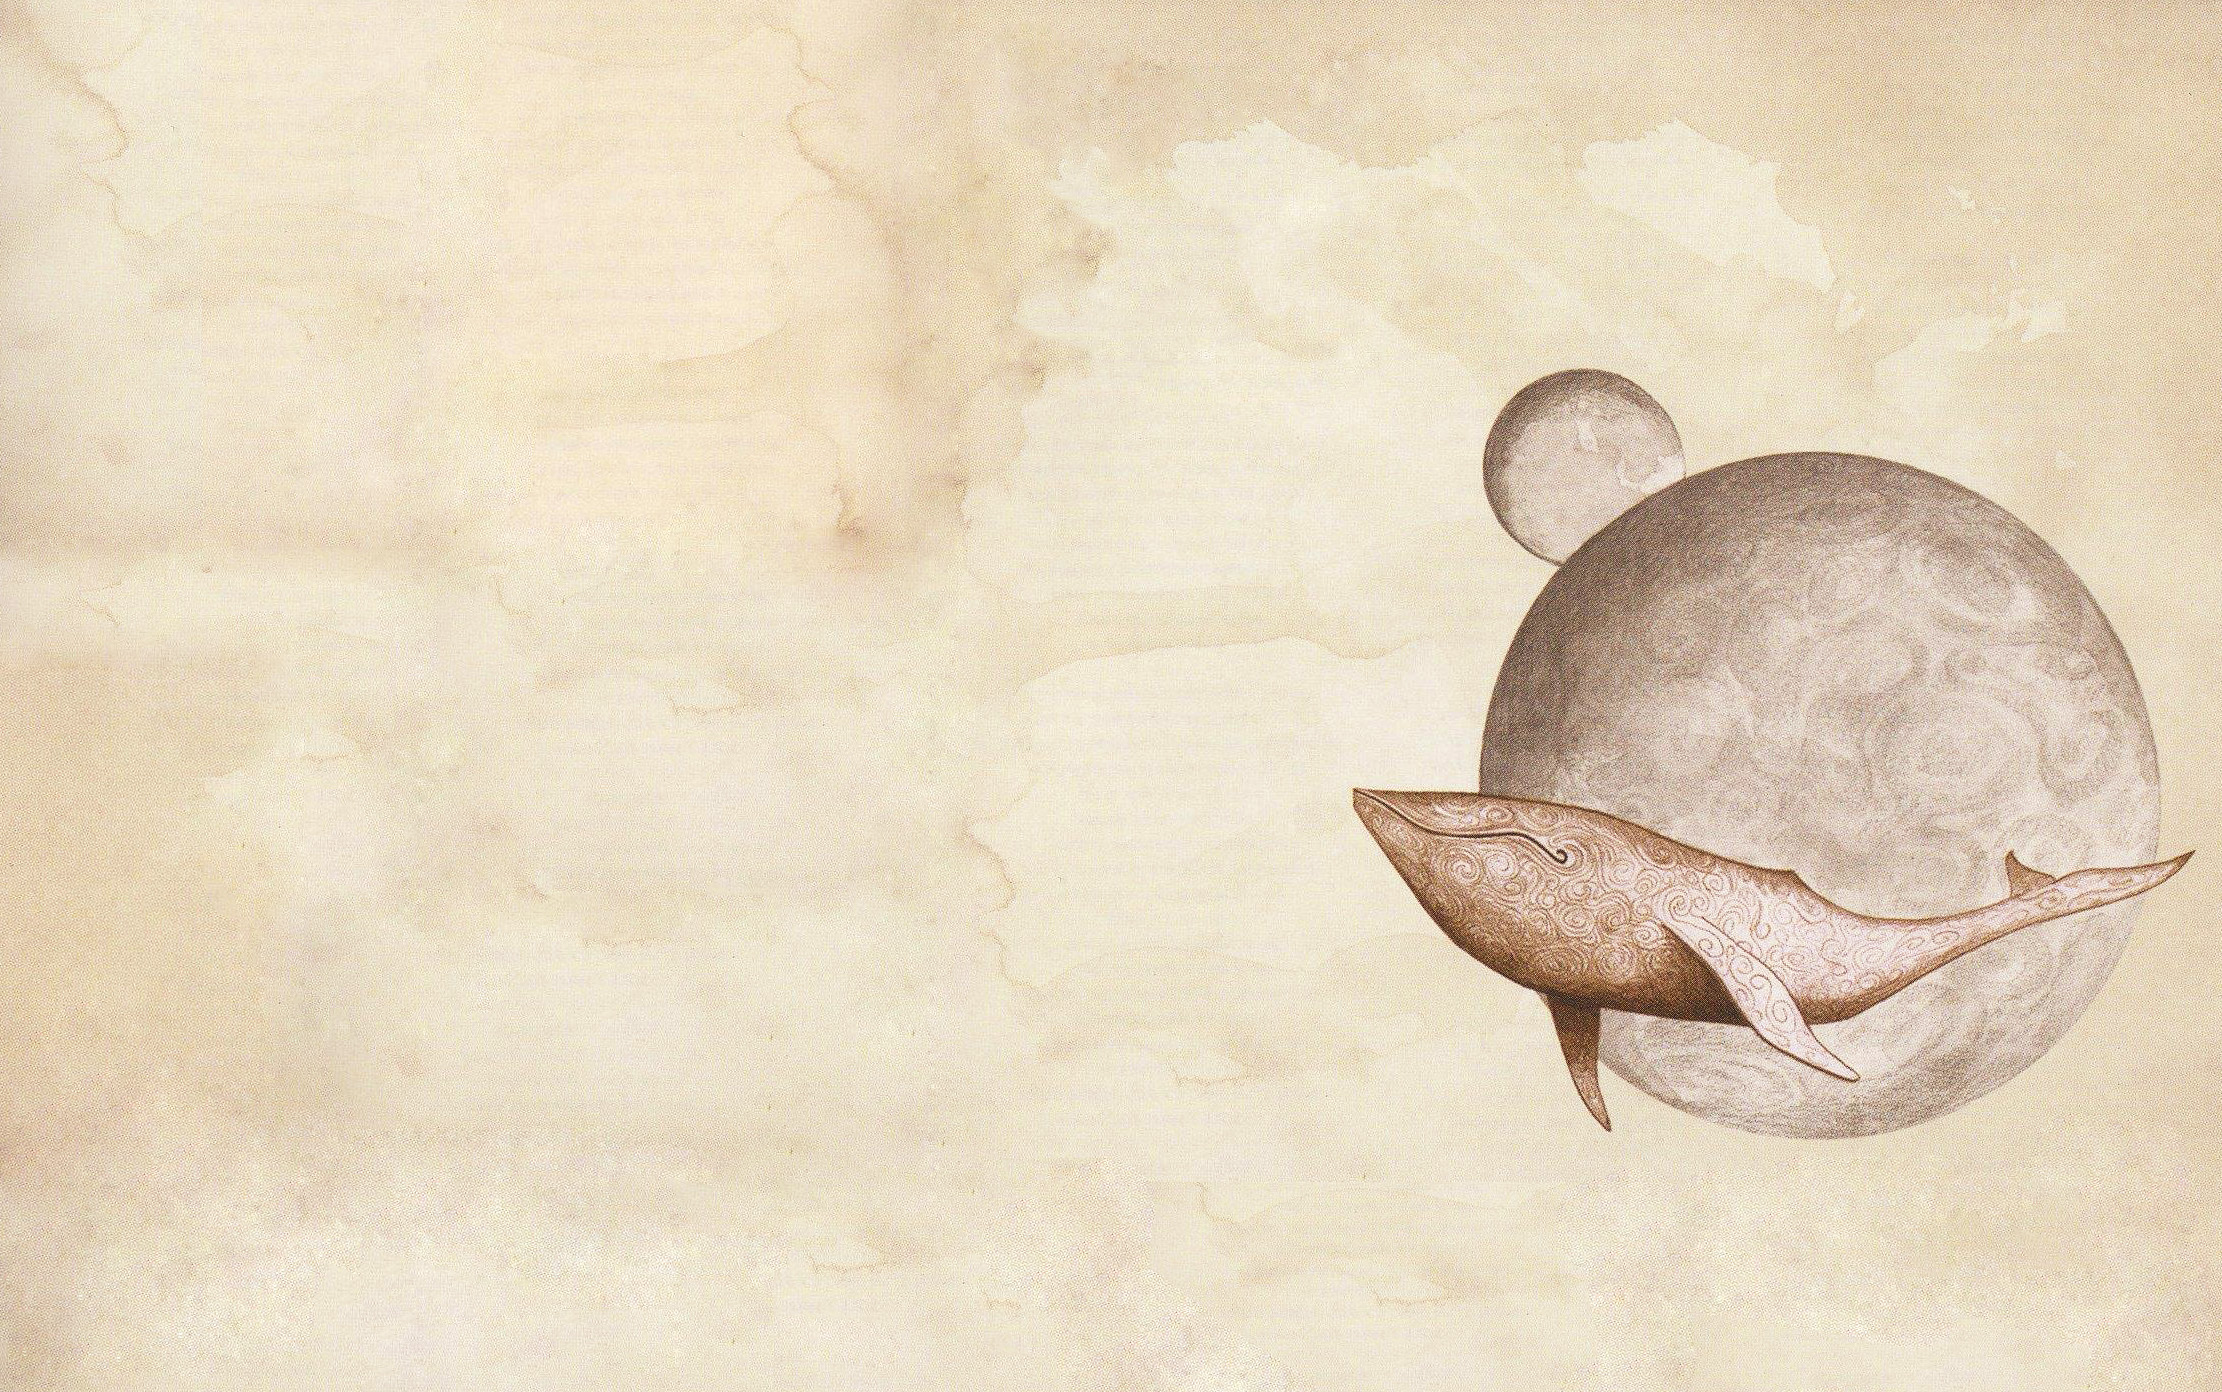 Fantasy Whale HD Wallpaper | Background Image